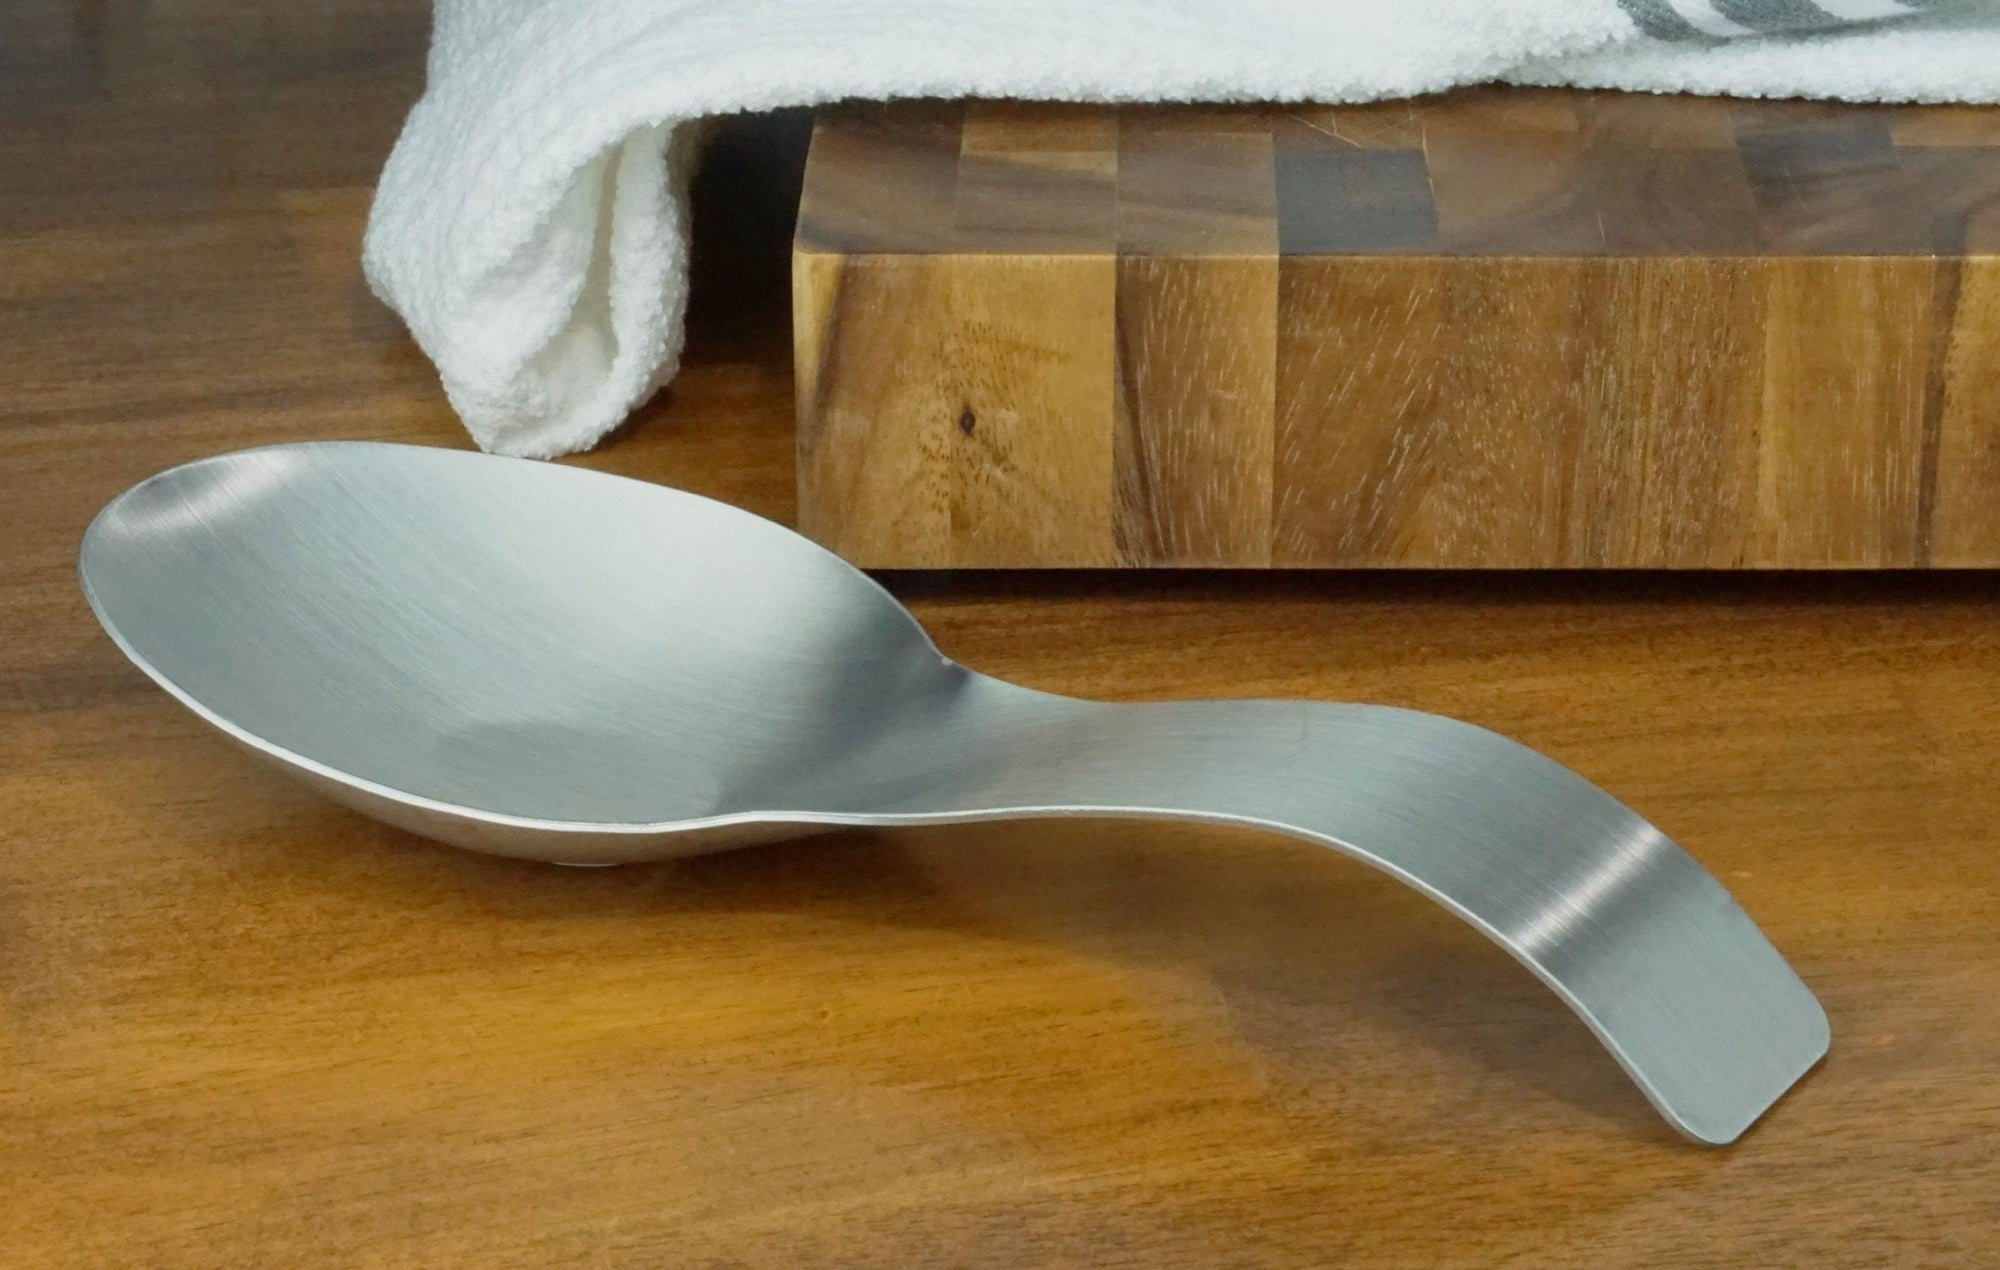 the silver stainless steel spoon holder